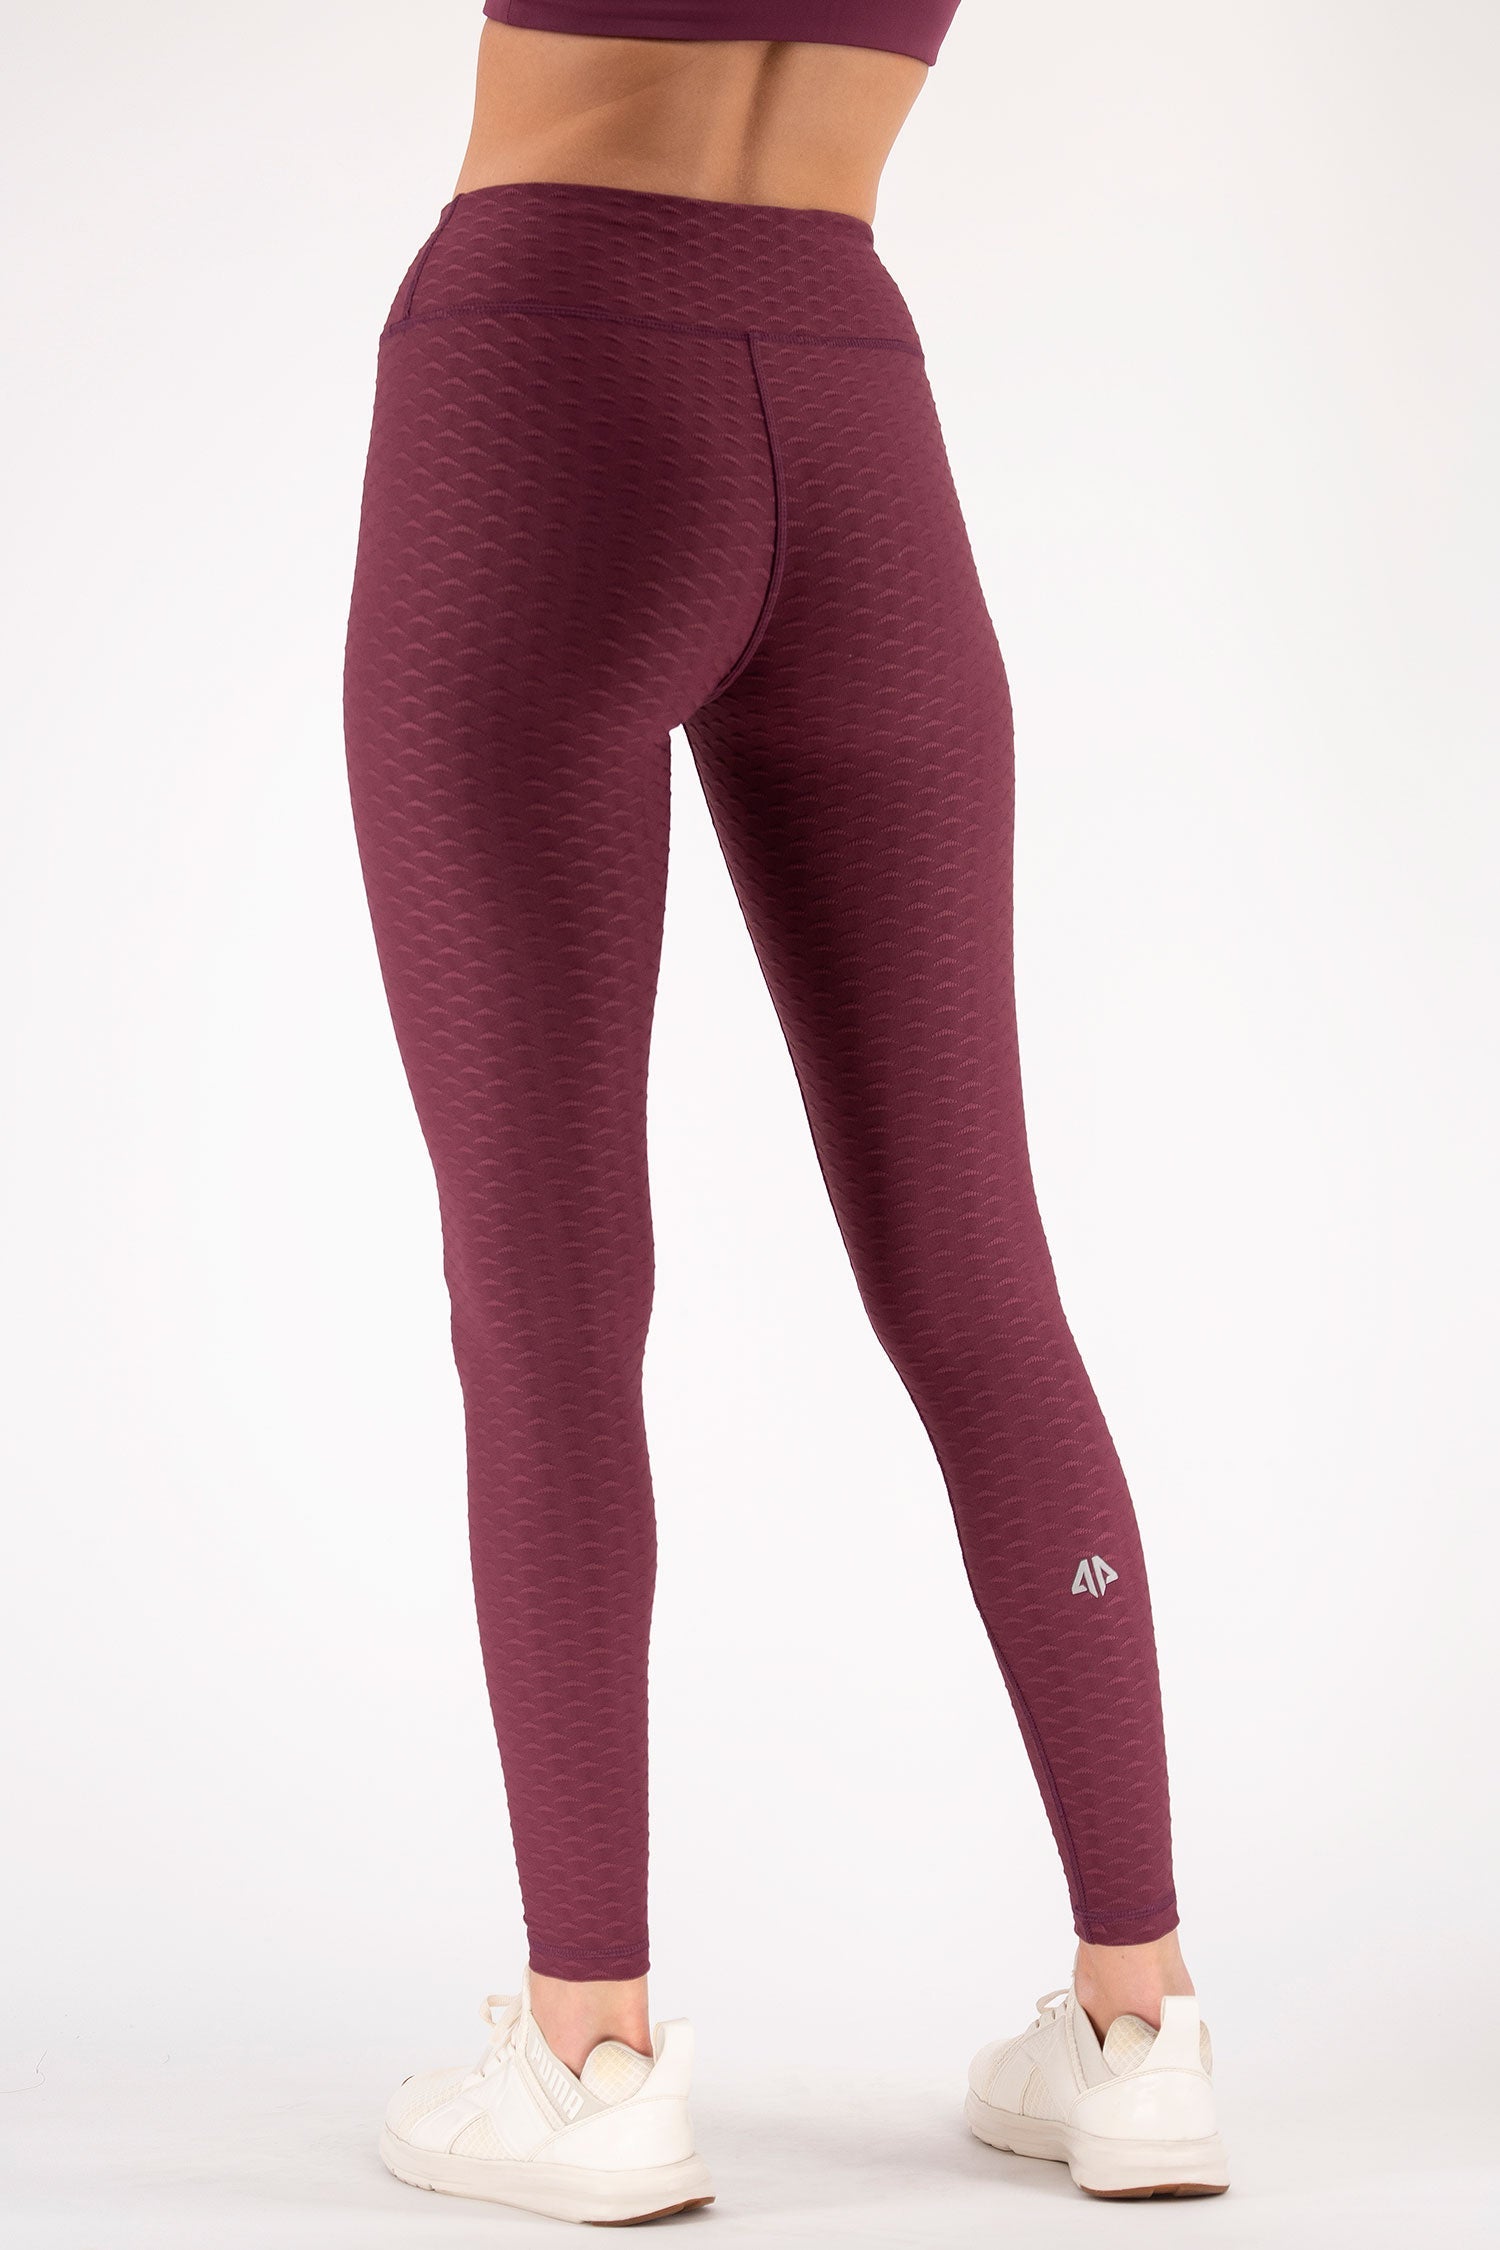 The new exclusive Alpha Luxe Deep V Leggings just released today